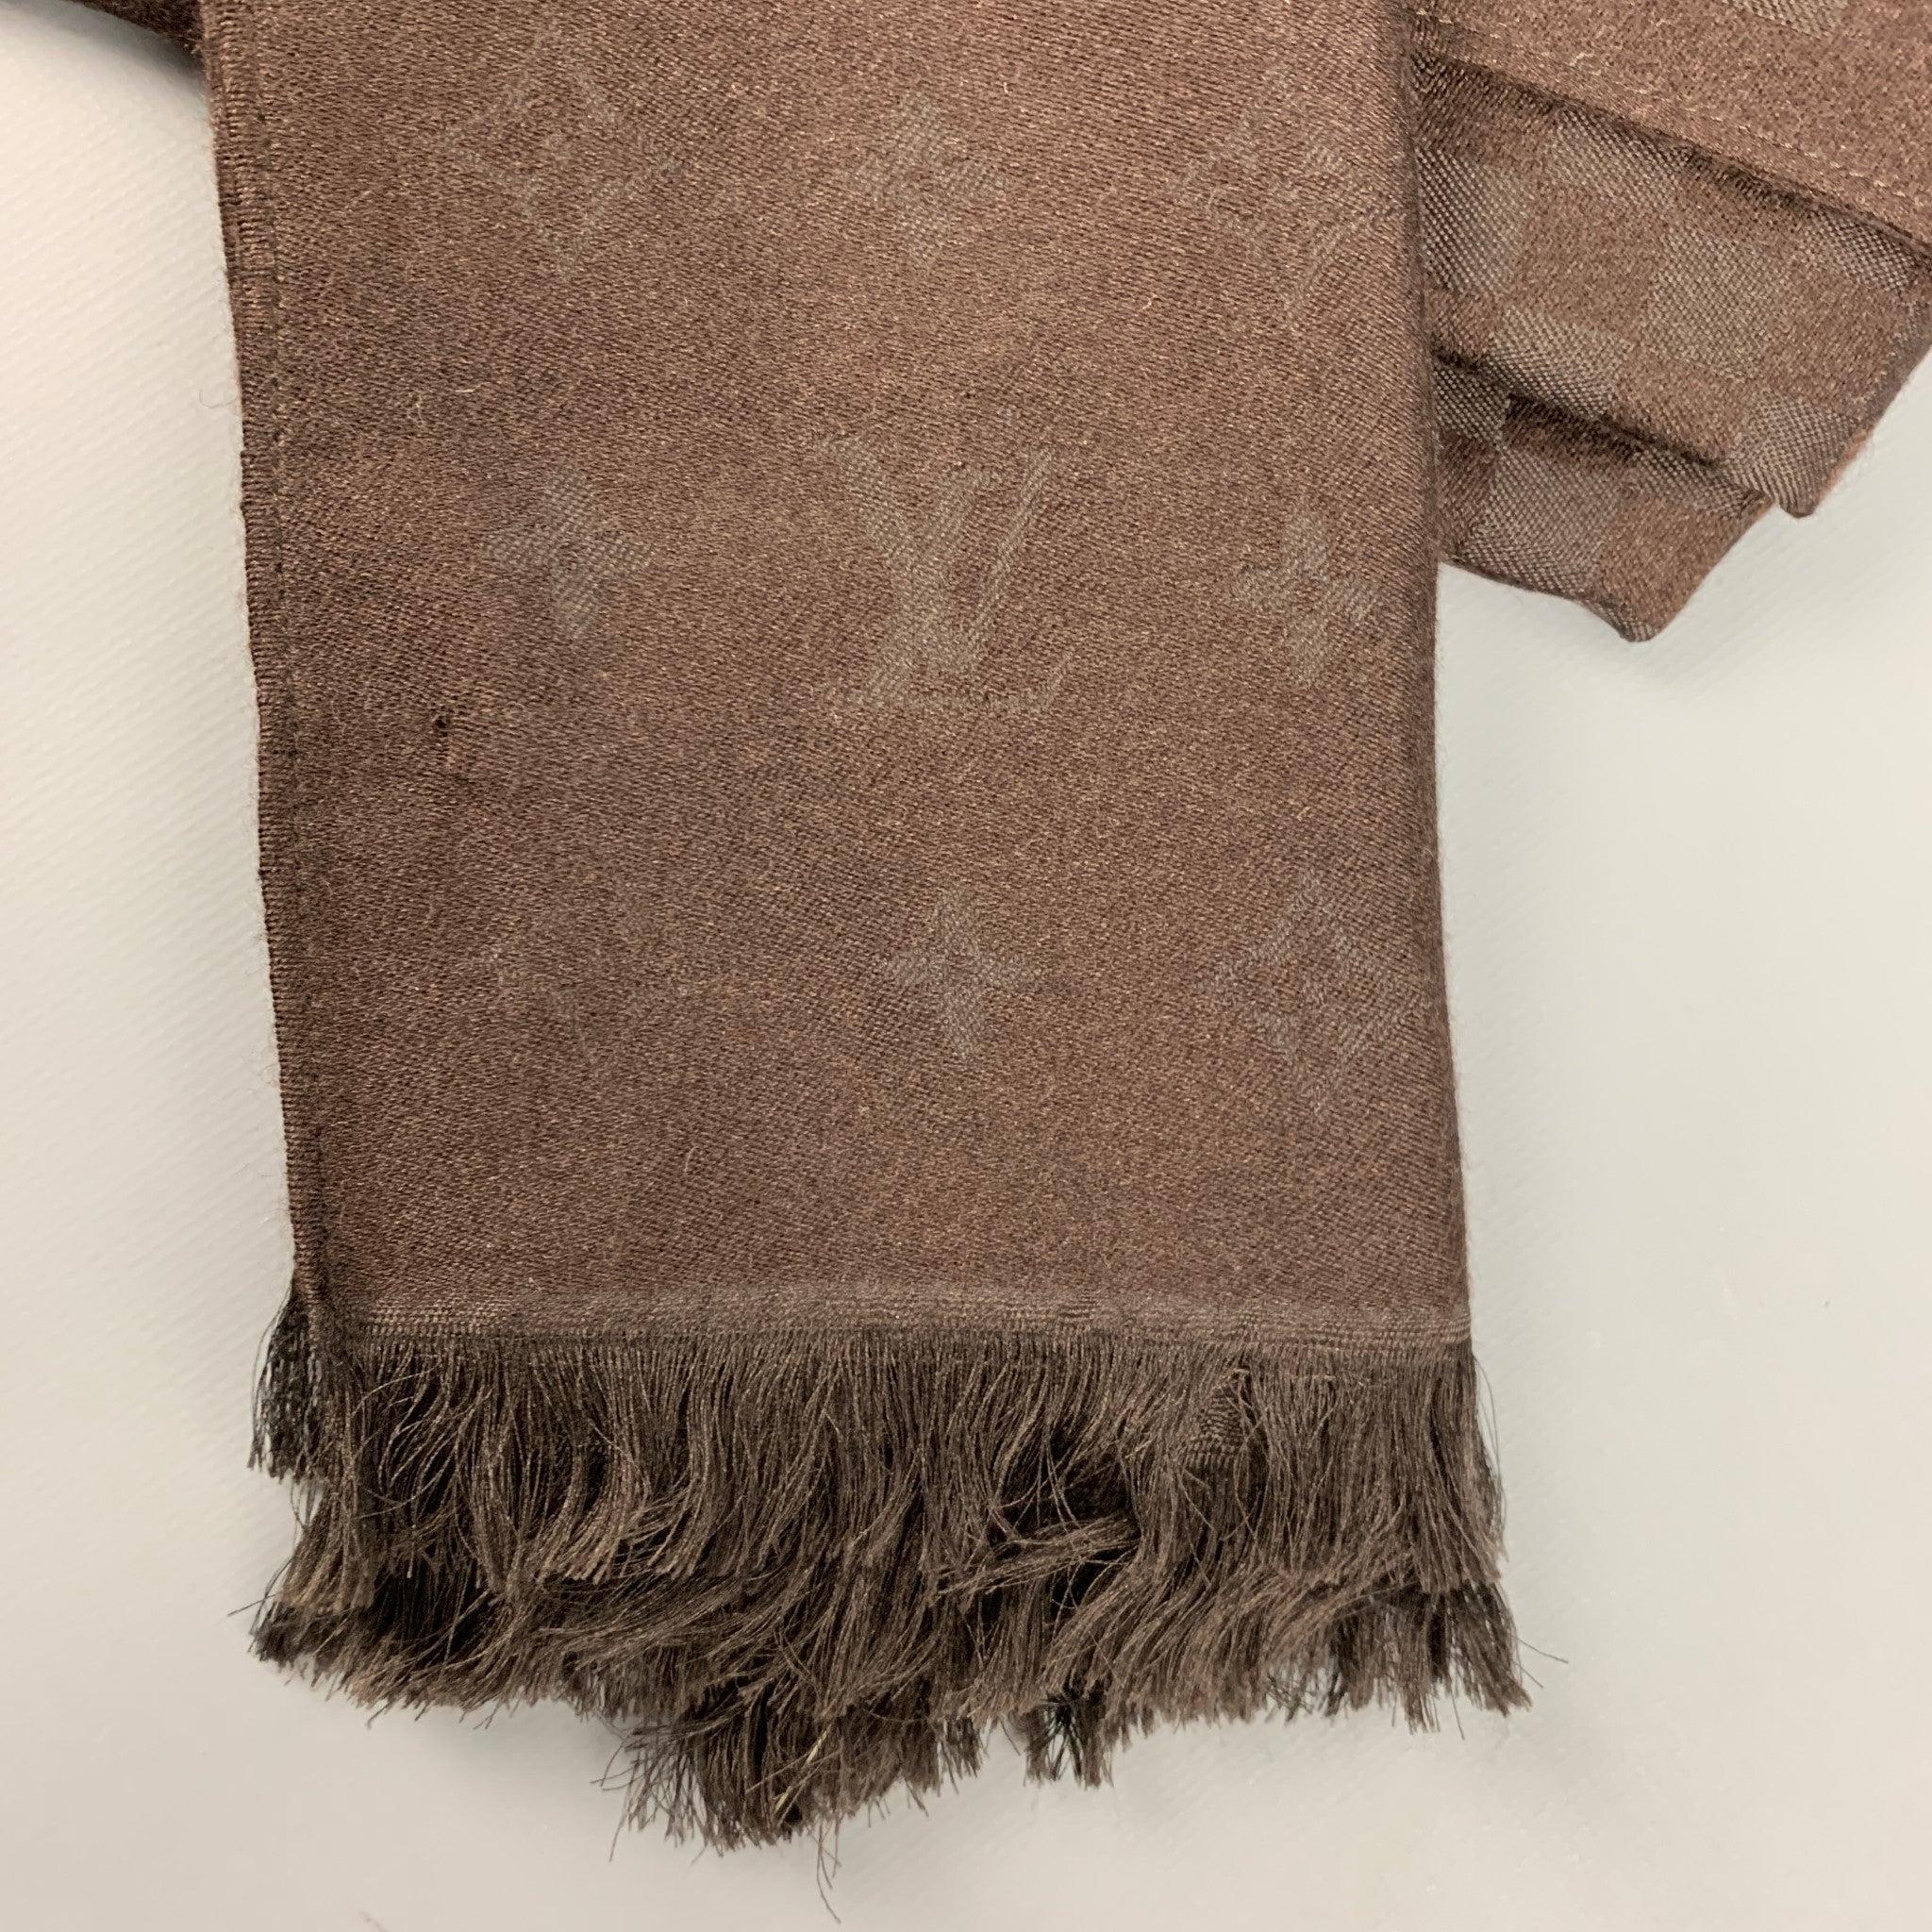 LOUIS VUITTON scarf comes in a brown monogram cashmere and silk jacquard material. Made in Italy.Very Good Pre-Owned Condition.  

Measurements: 
  80 inches  x 12 inches  
  
  
 
Reference: 126857
Category: Scarves & Shawls
More Details
   